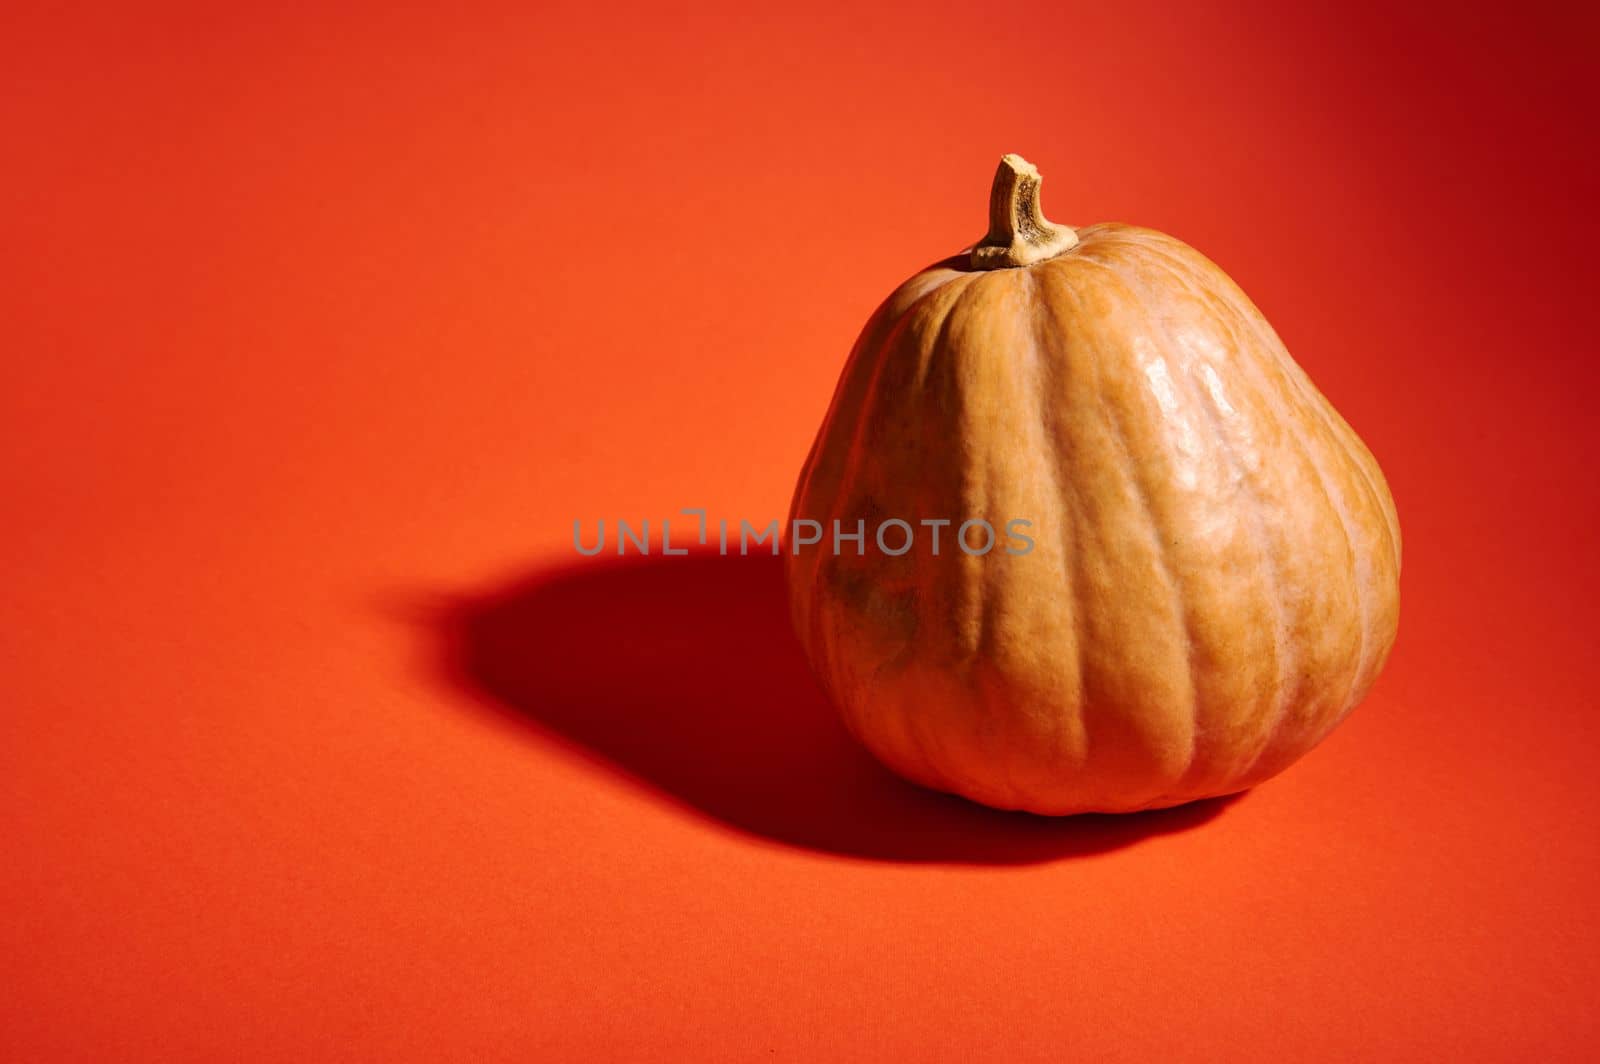 Studio shot of a whole organic ripe pumpkin, isolated on a bright orange background with copy advertising space. Pumpkin for Halloween party or Thanksgiving Day, making Jack-O-Lantern